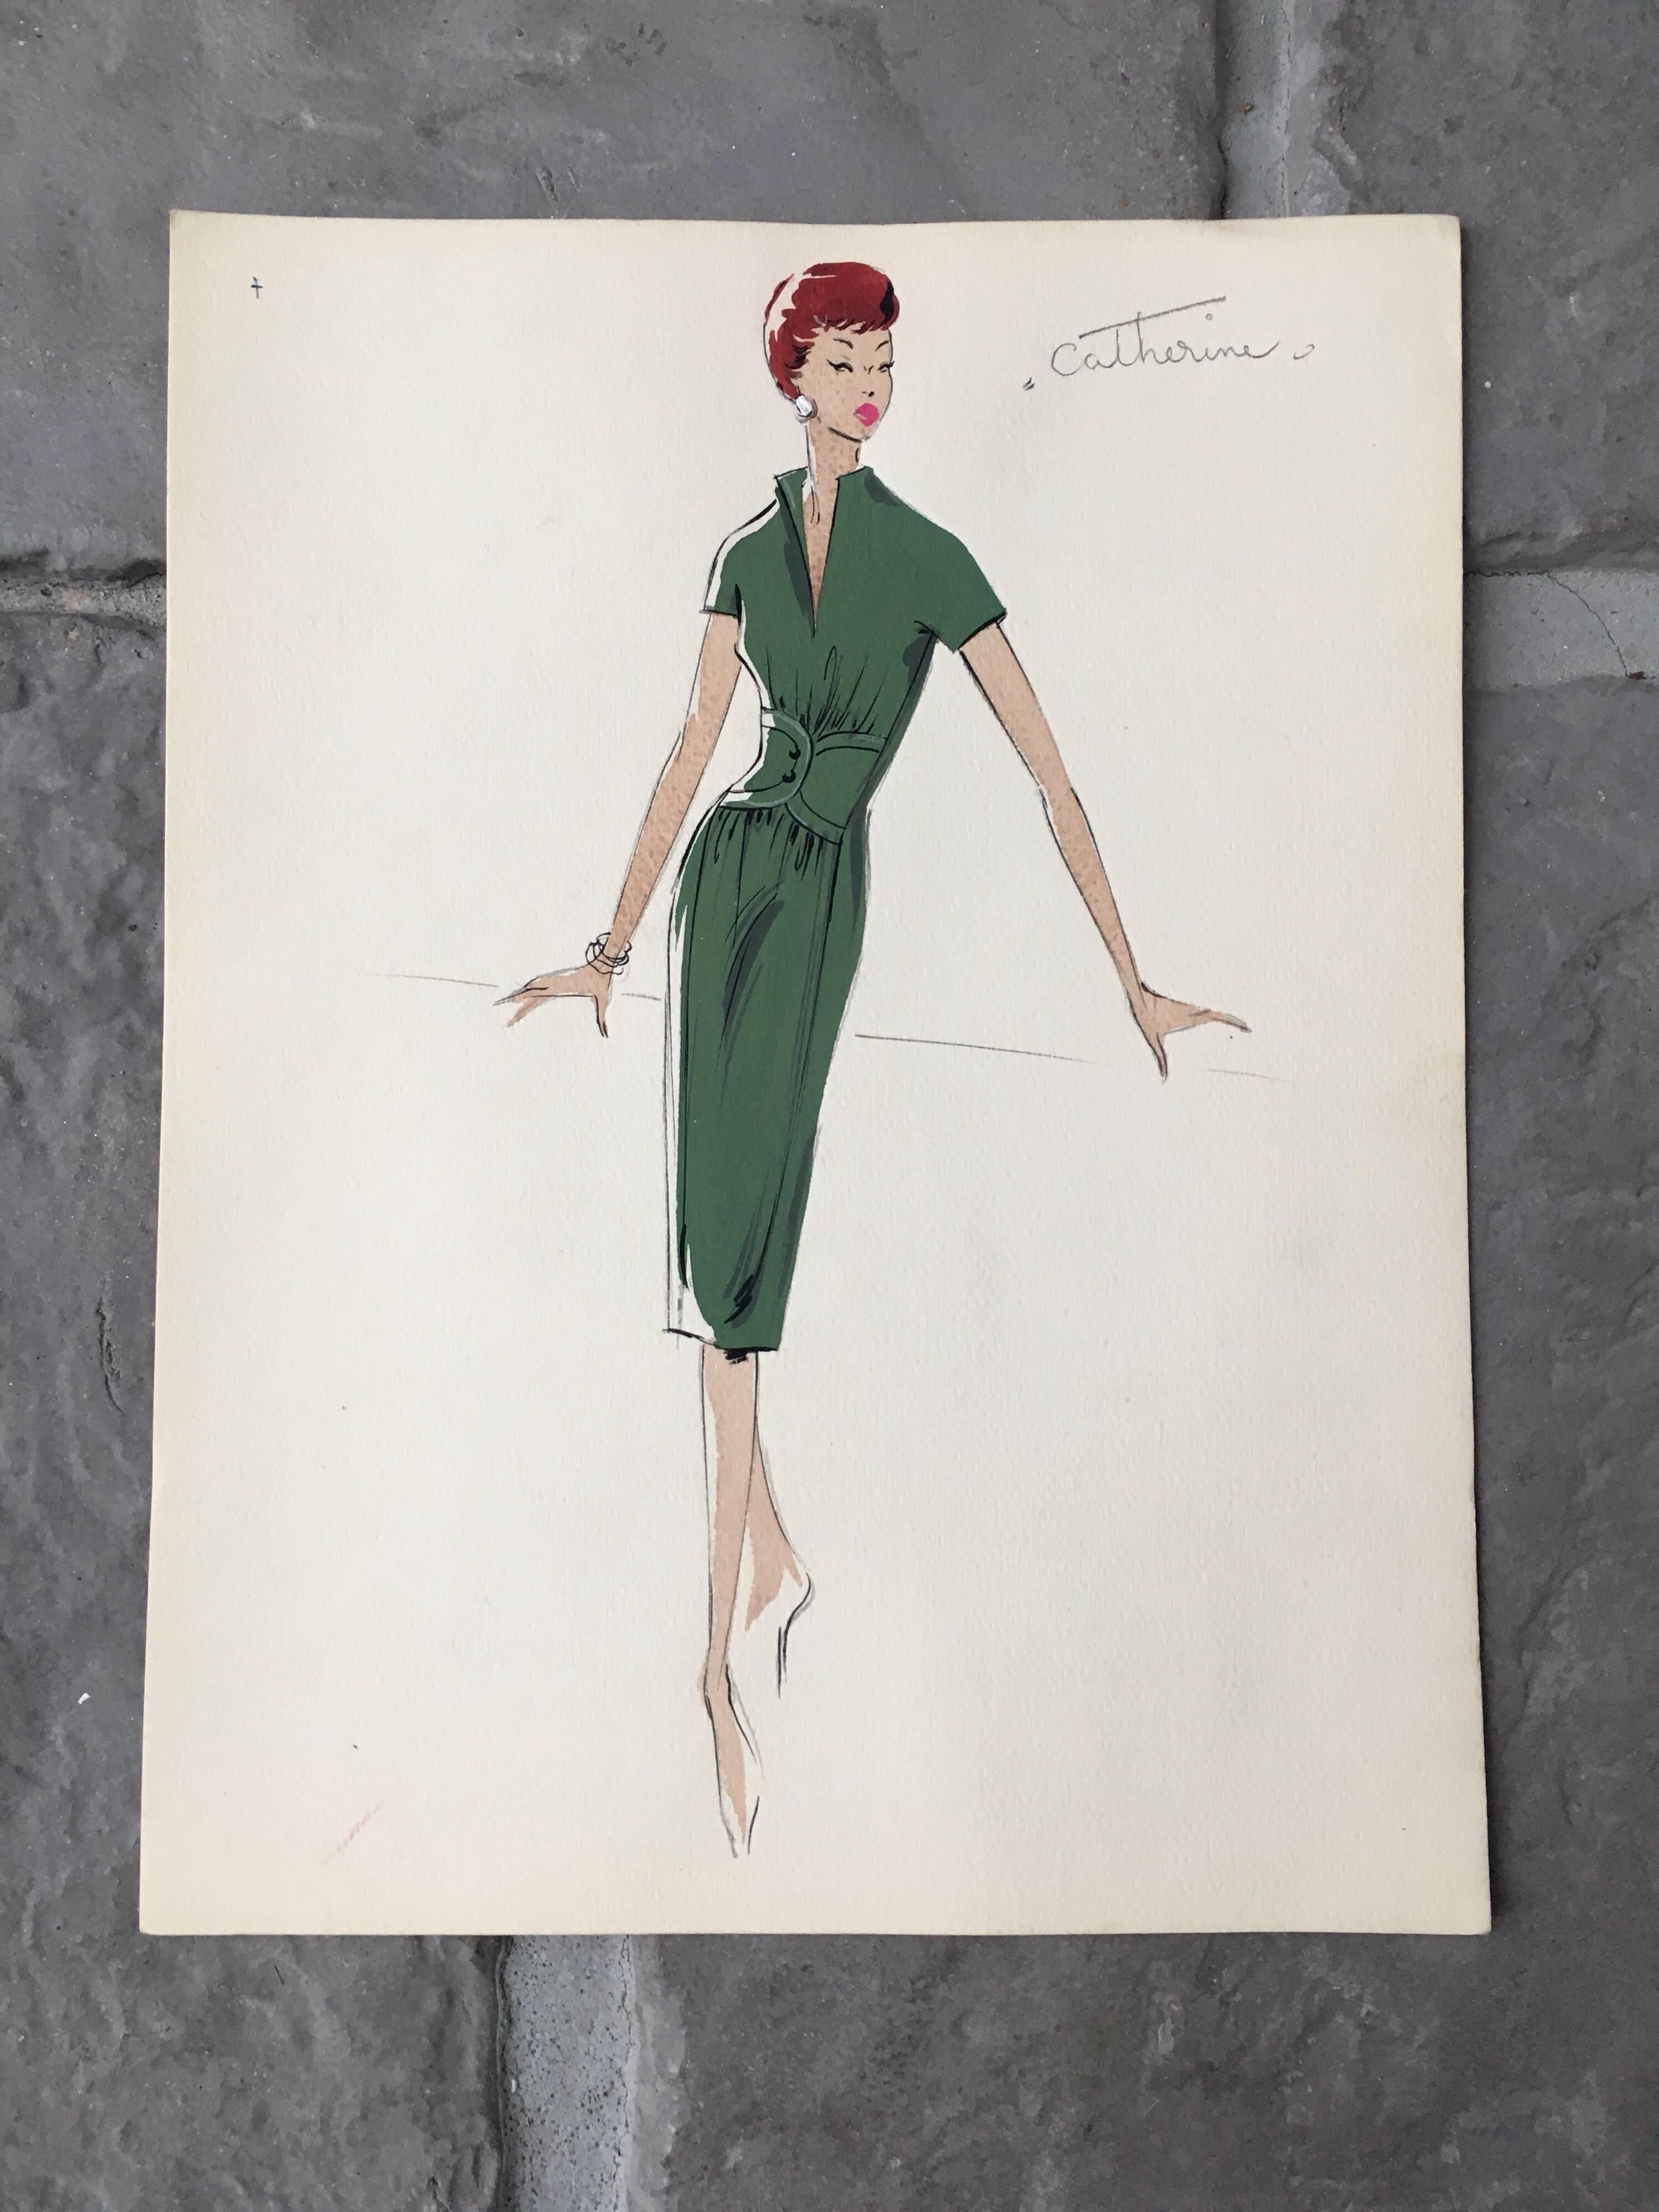 Lady in 1950's Green Dress Parisian Fashion Illustration Sketch - Painting by Unknown